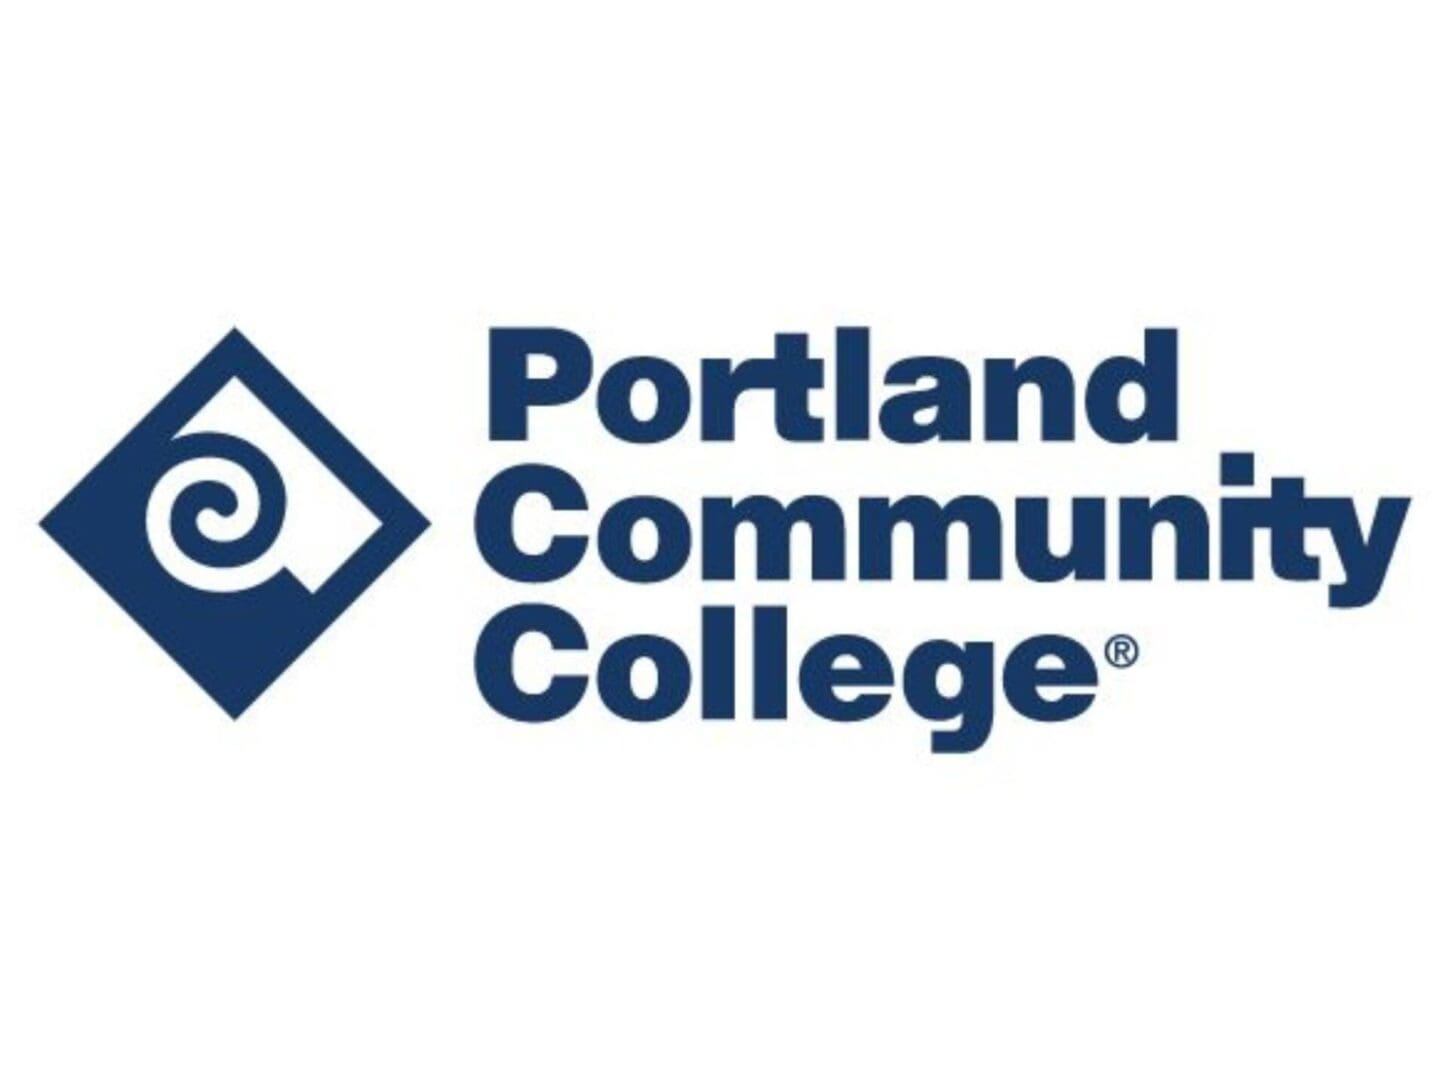 A blue and white logo of portland community college.